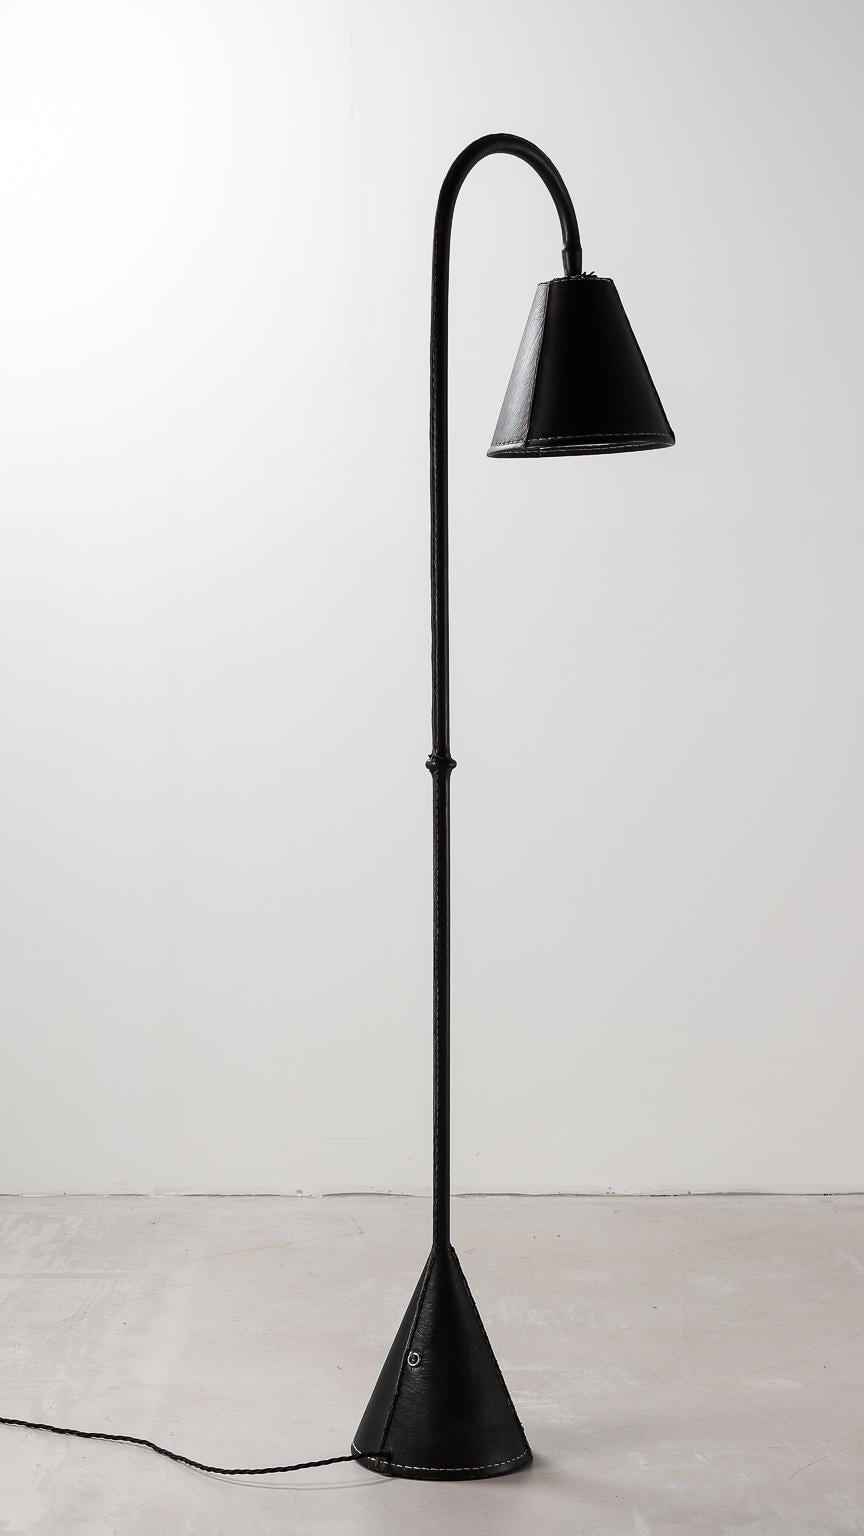 Classic Valenti Black Leather Floor Lamp Spanish 1960s with Stitching Detail In Good Condition In London, Charterhouse Square